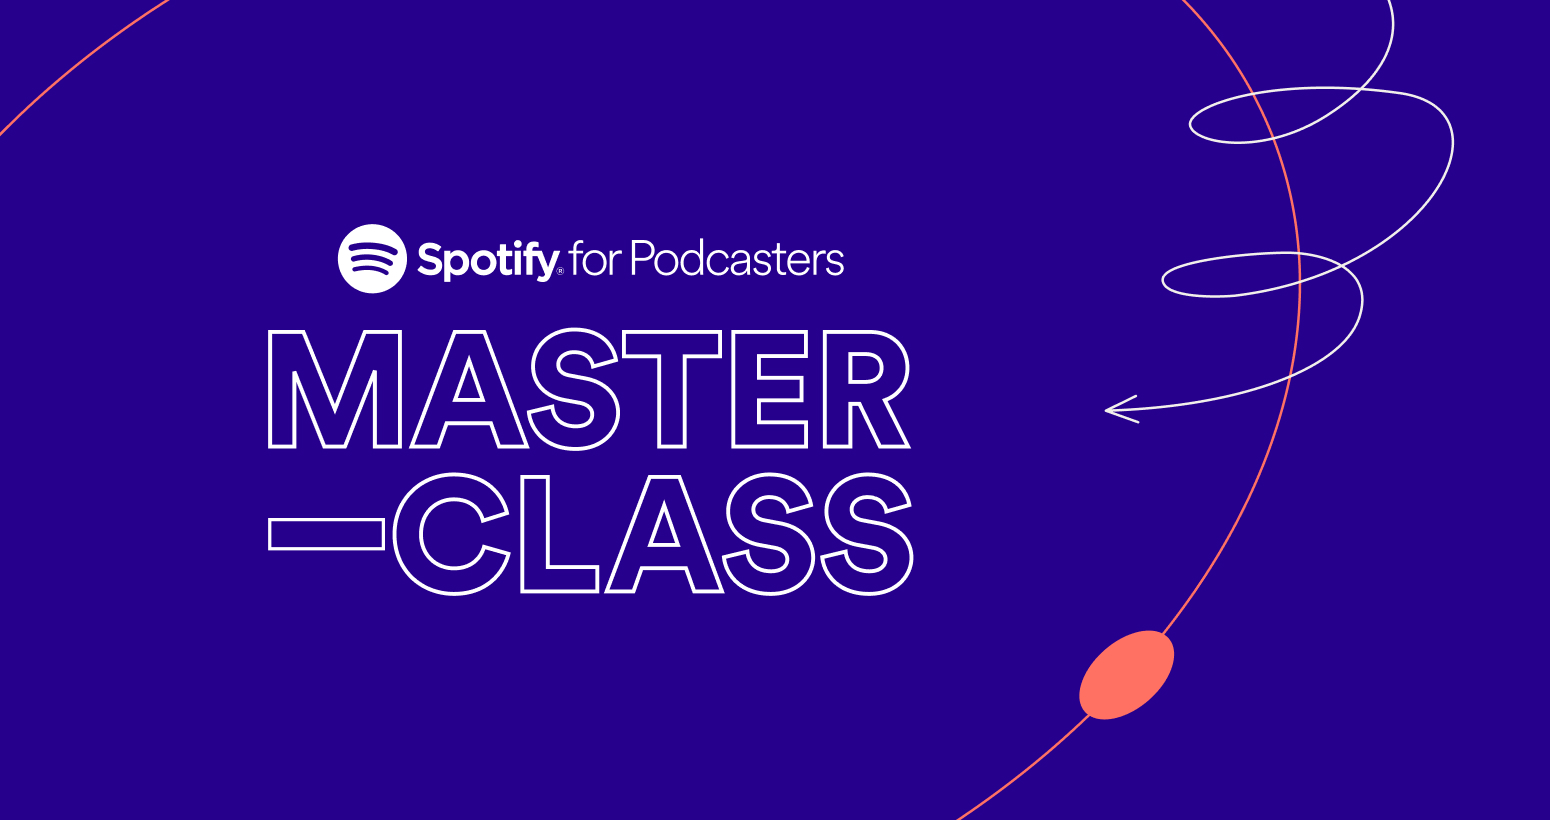 Unlock Your Podcast Potential With Spotify for Podcasters